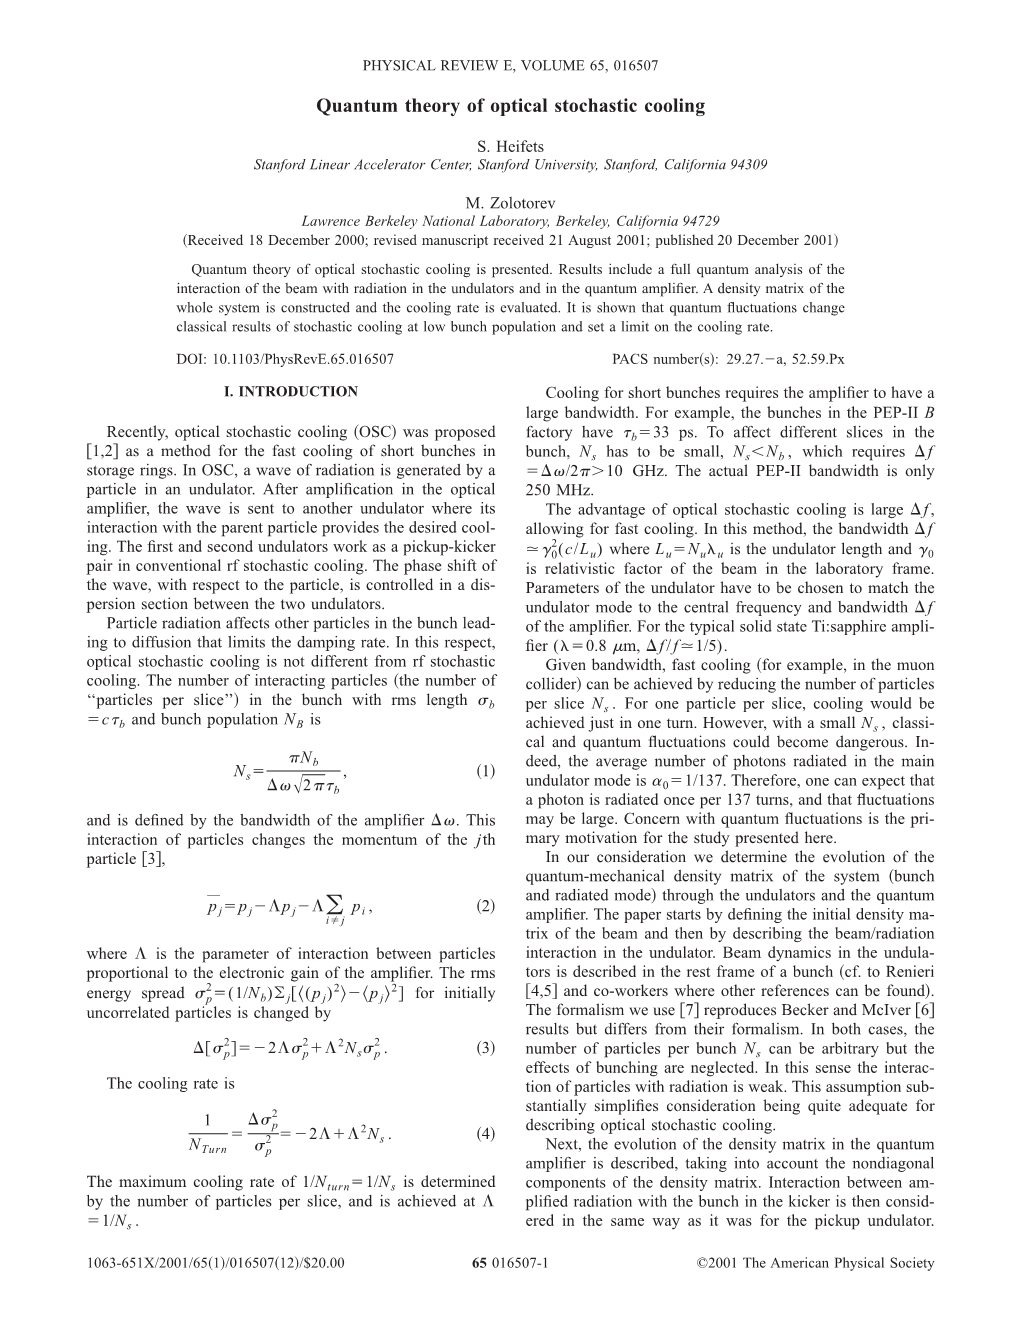 Quantum Theory of Optical Stochastic Cooling